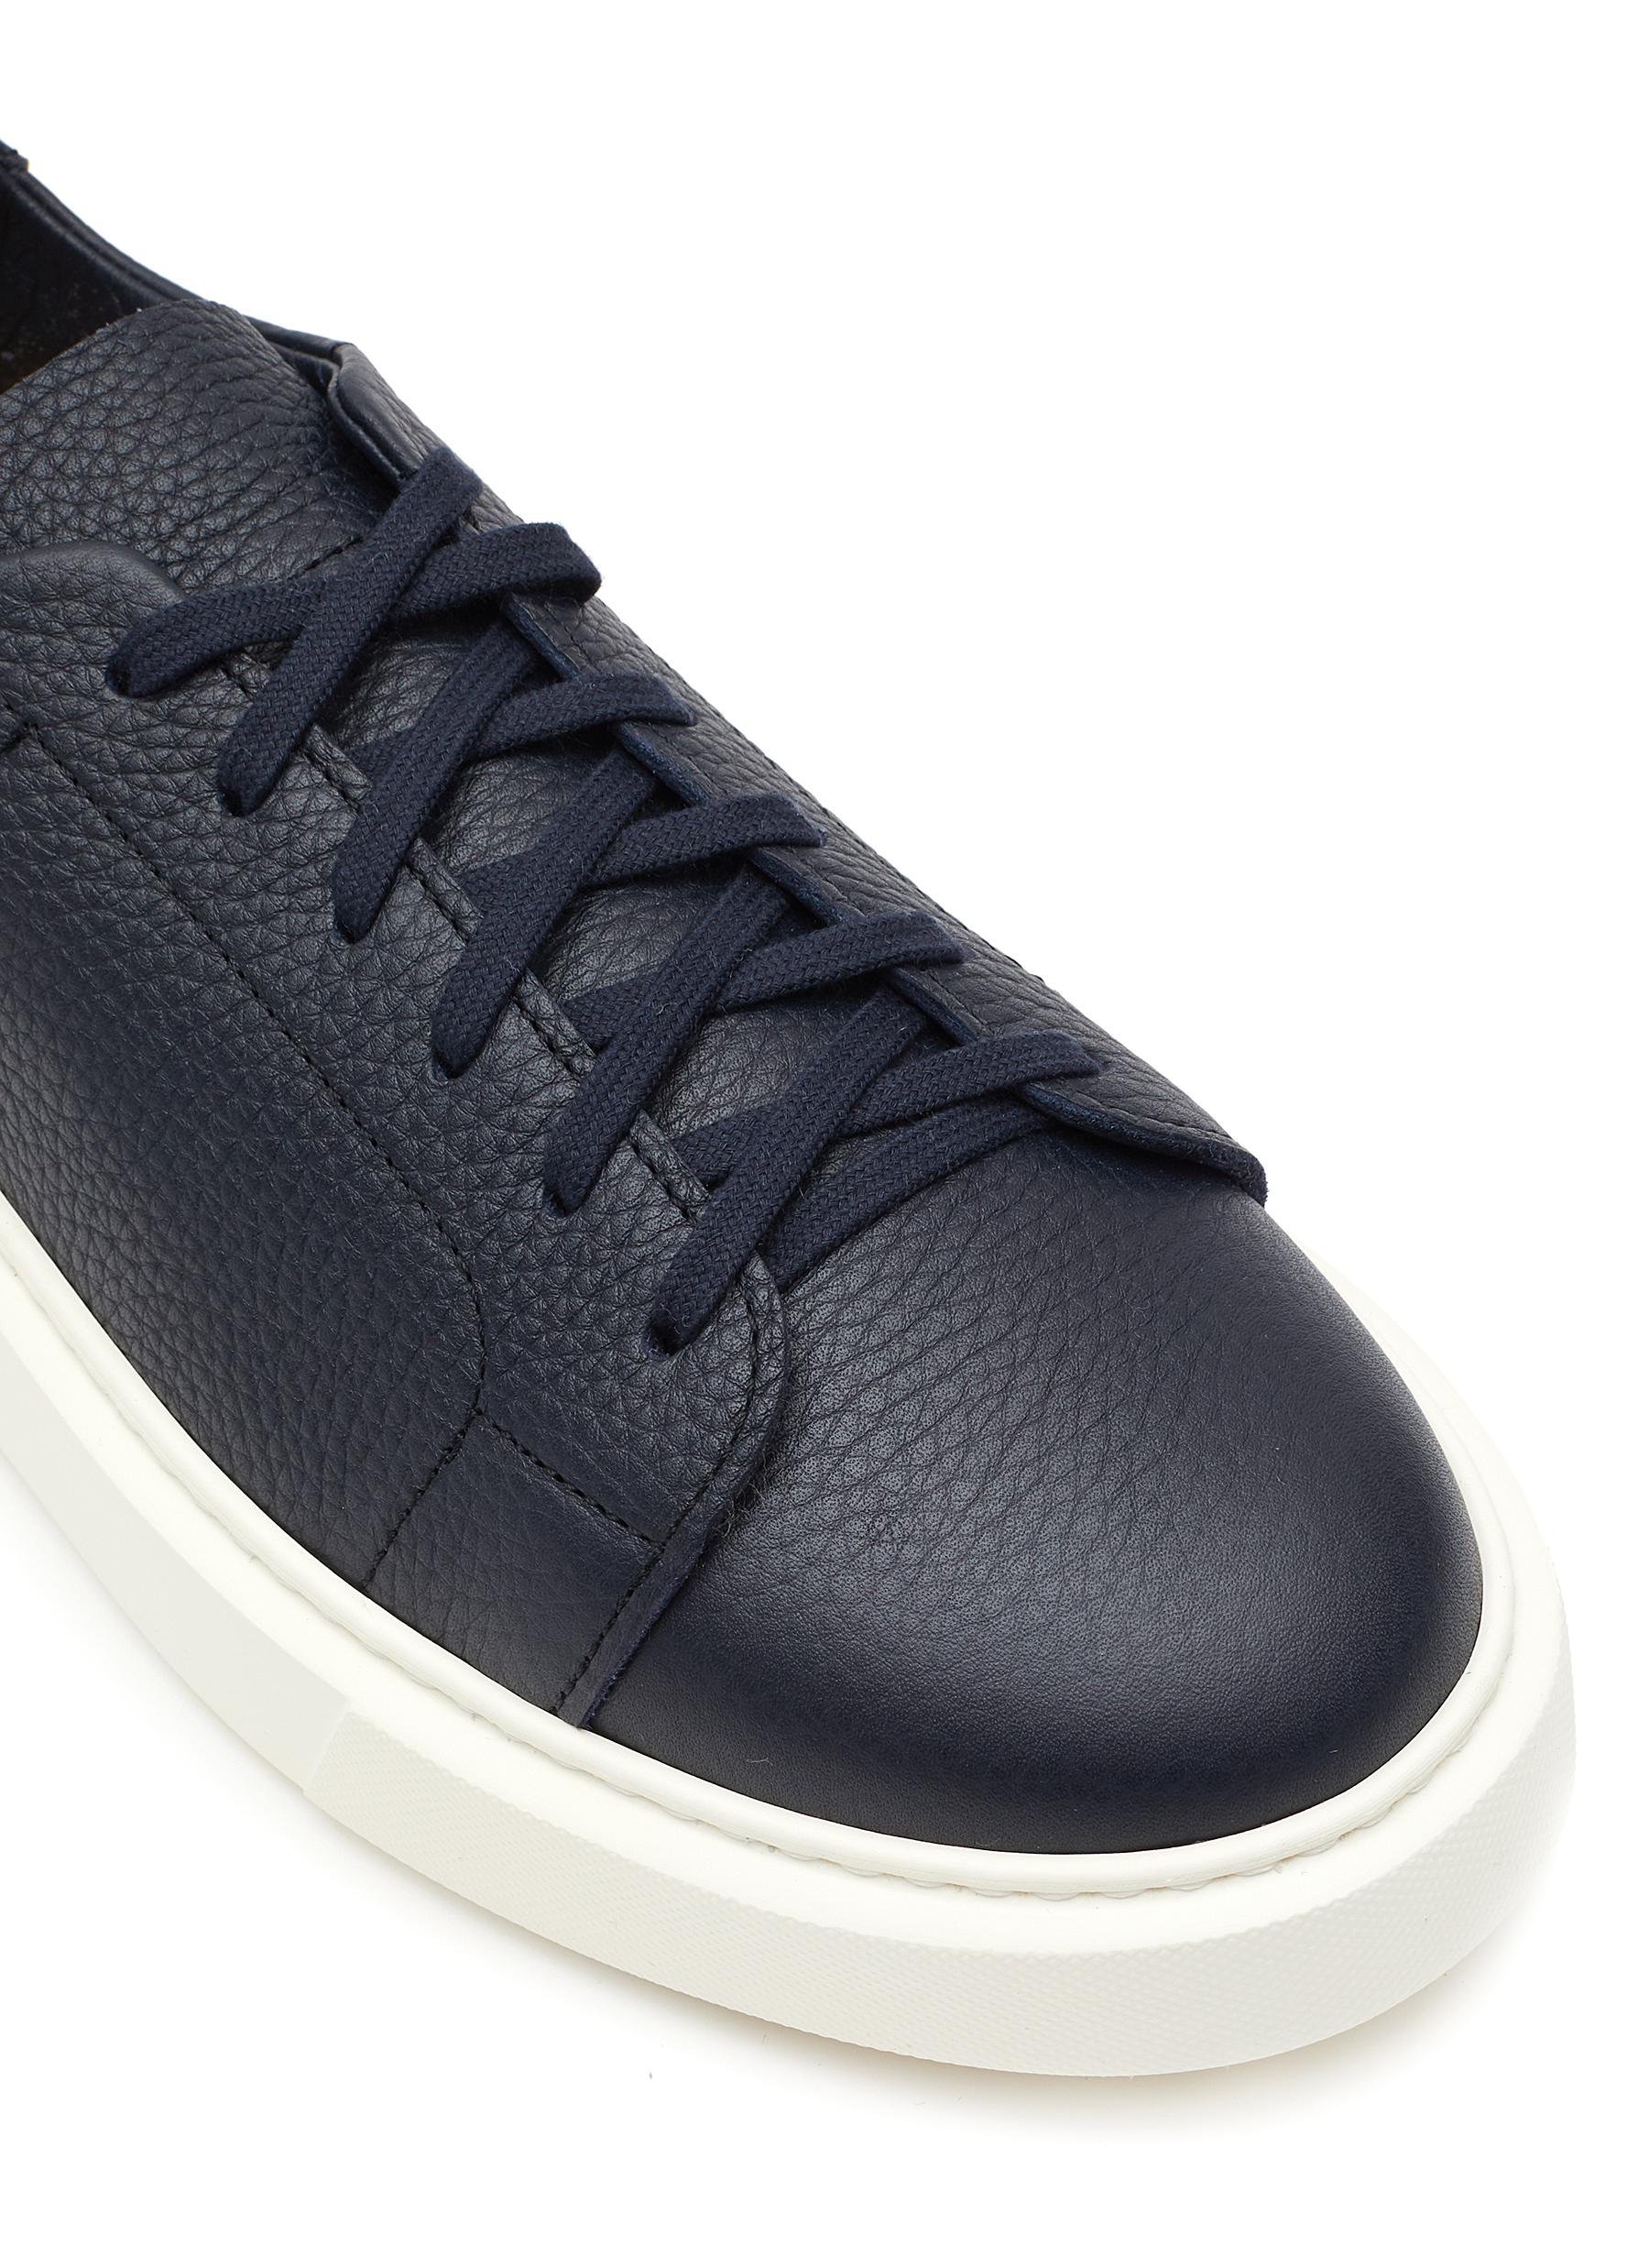 ‘CHRONOS’ PEBBLE LEATHER LOW TOP LACE UP TENNIS SNEAKERS